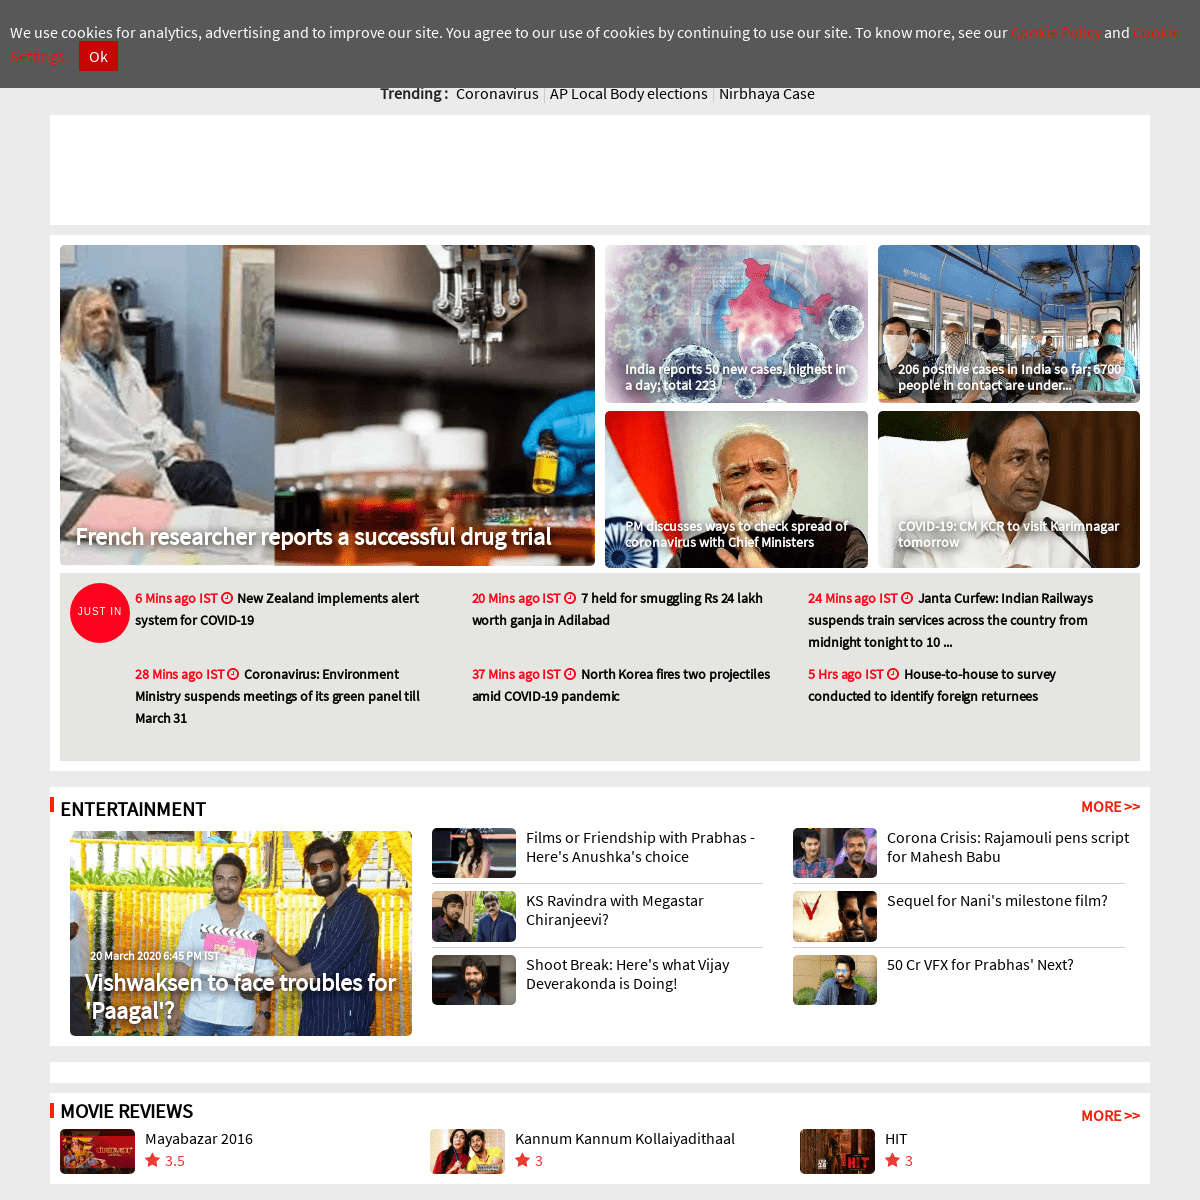 A complete backup of thehansindia.com